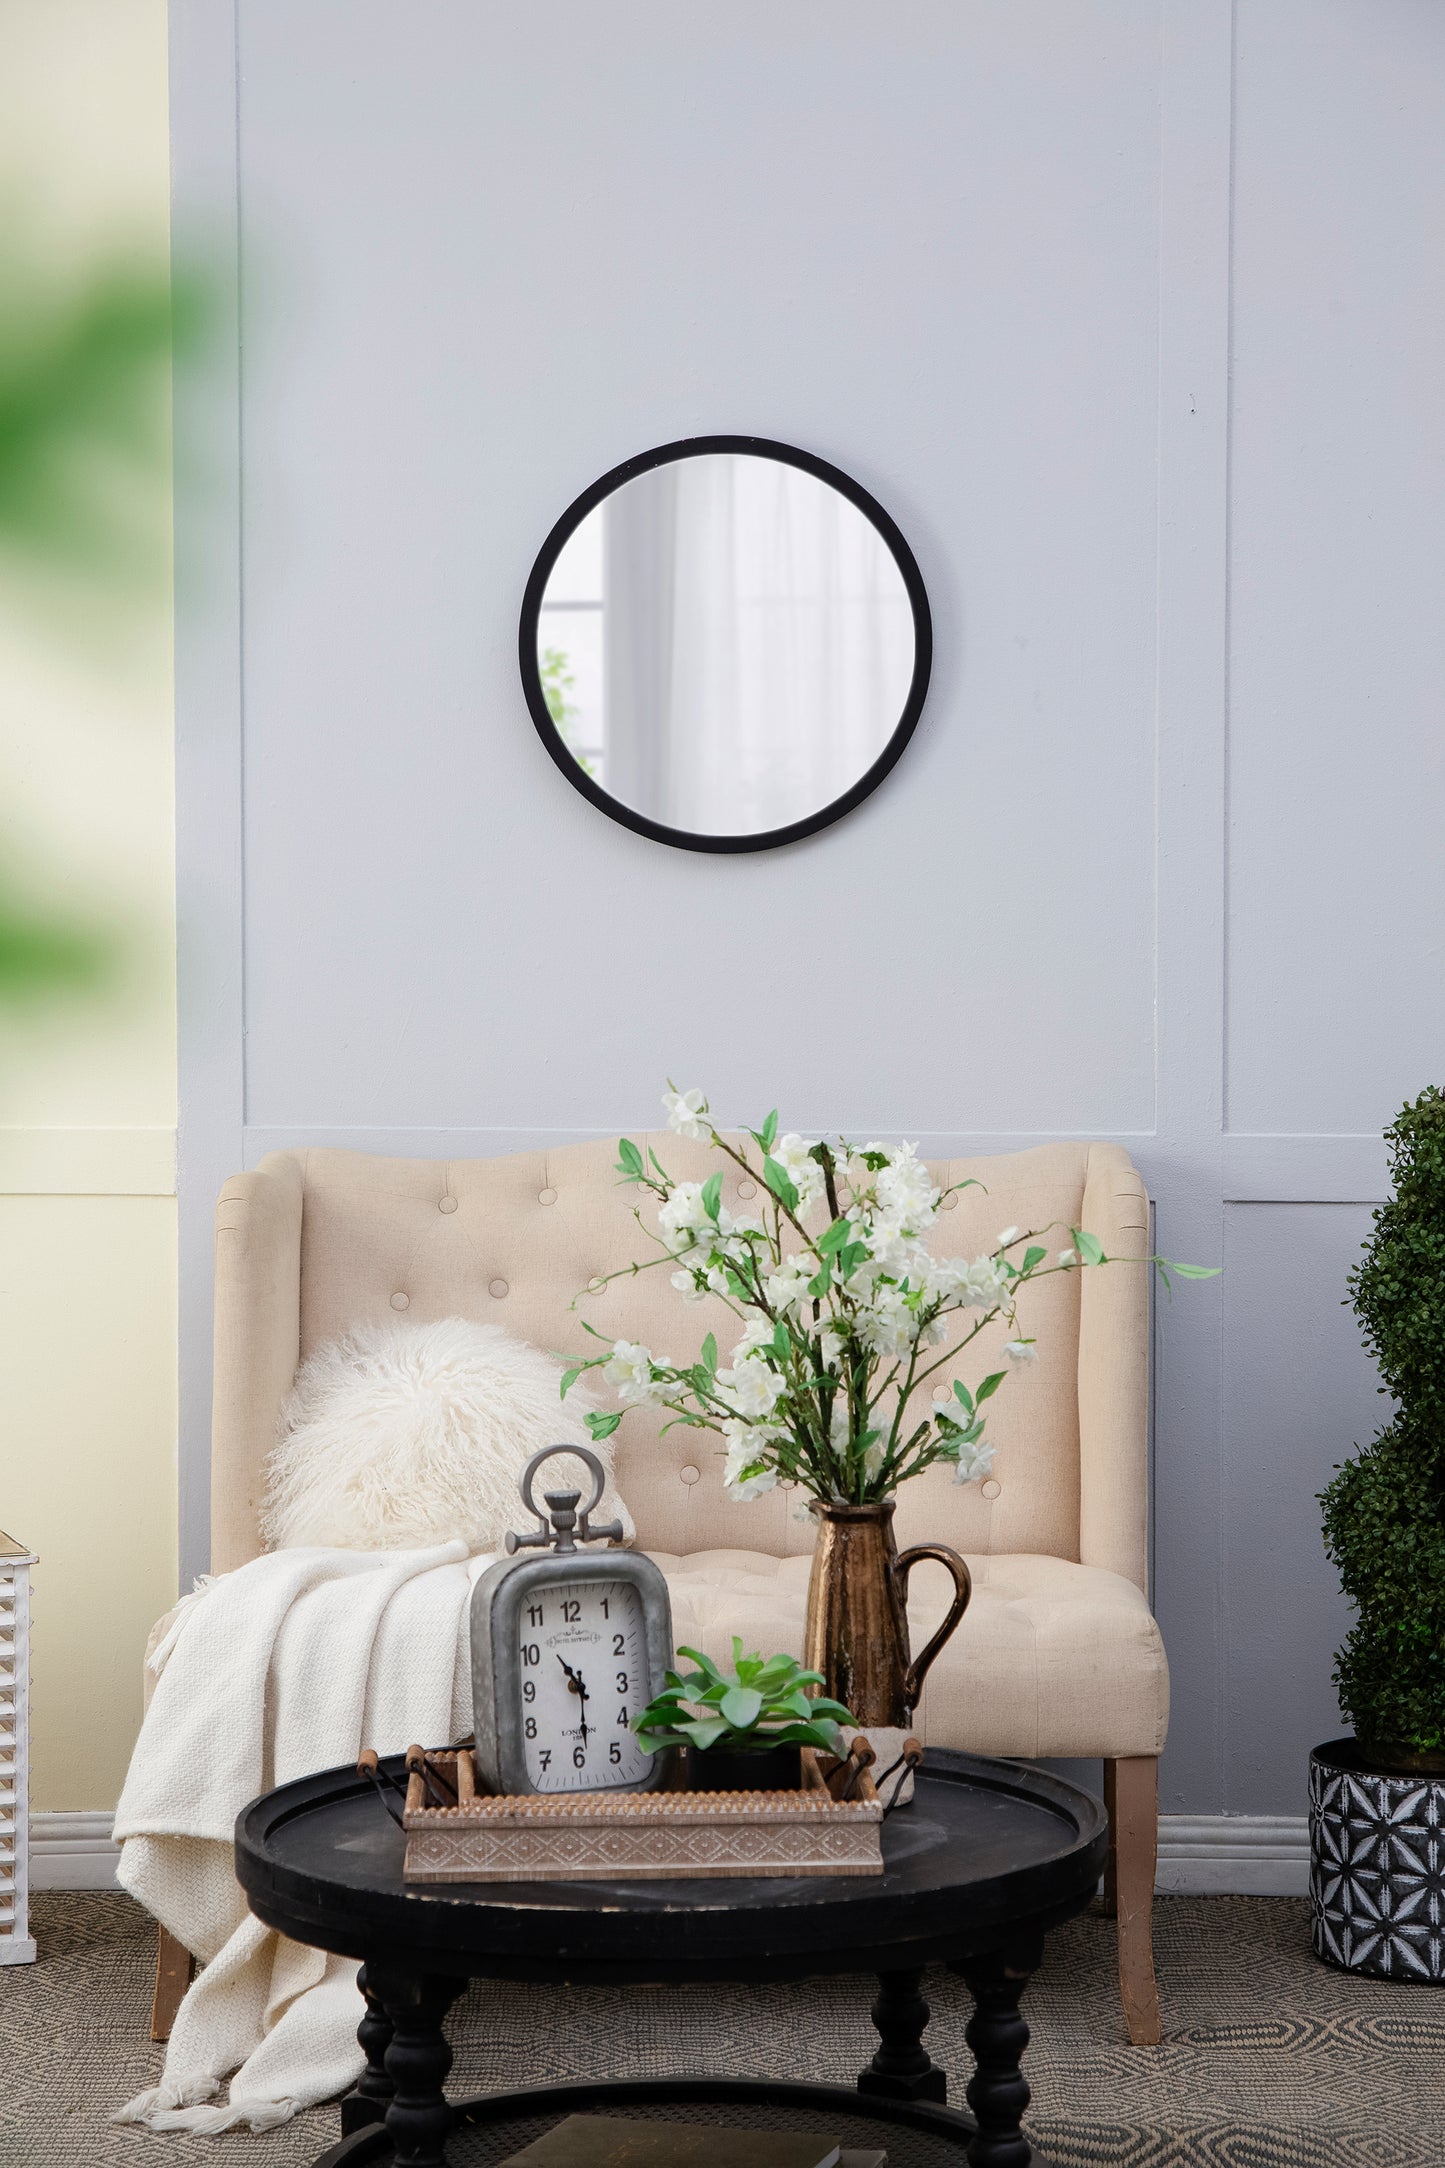 20" x 20" Circle Wall Mirror with Black Wooden Frame